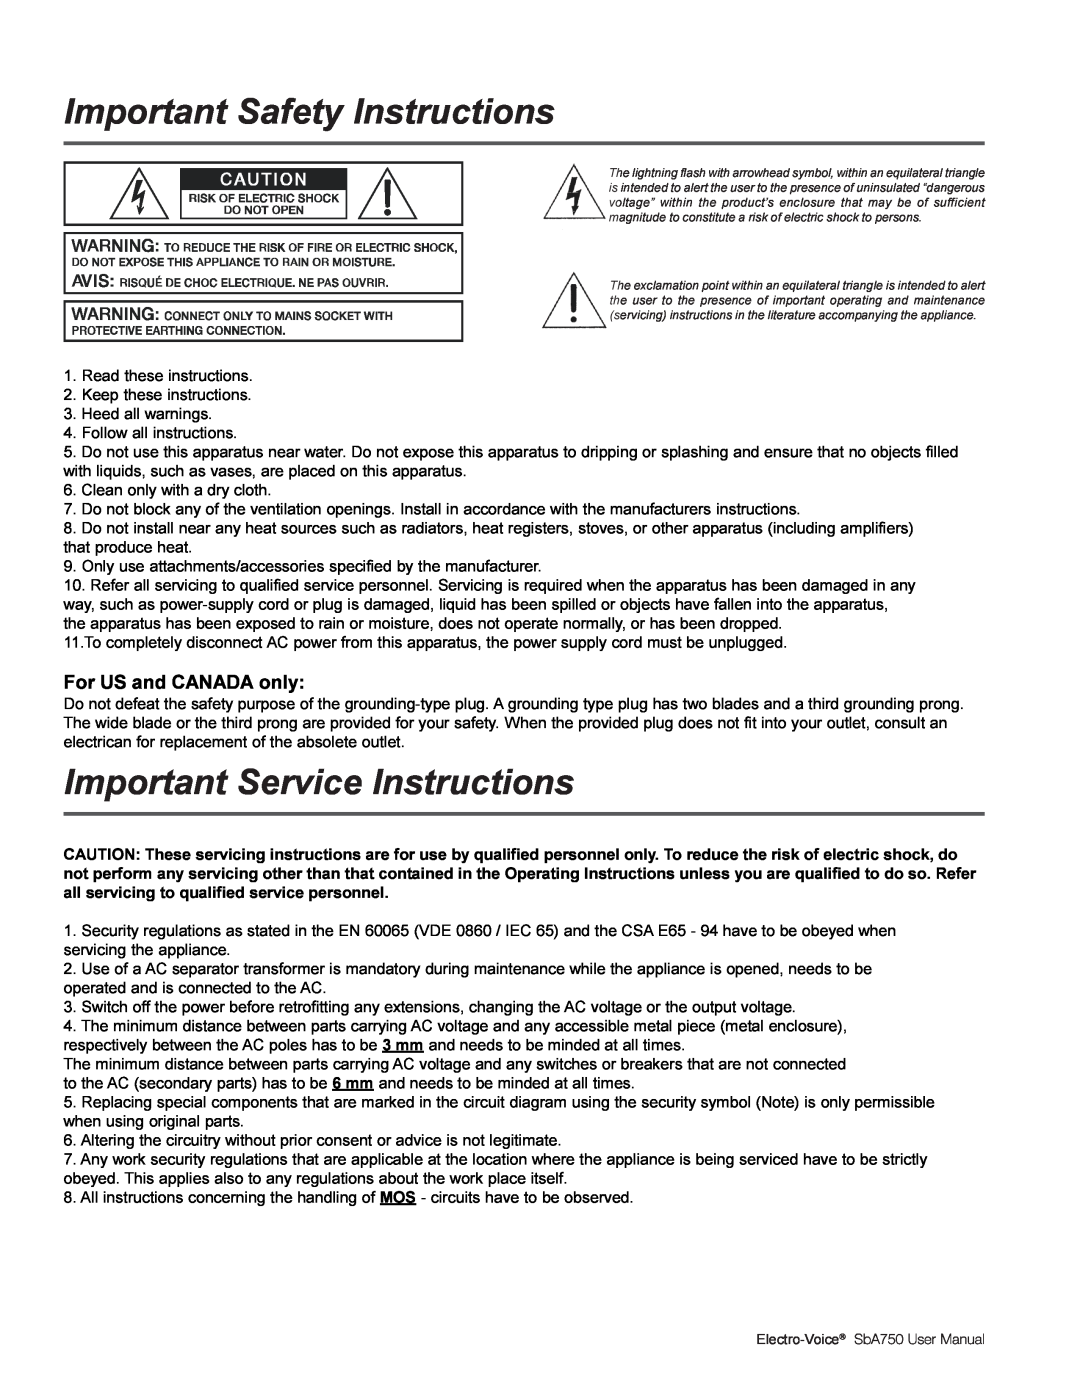 Electro-Voice SBA750 Important Safety Instructions, Important Service Instructions, For US and CANADA only, Electro-Voice 